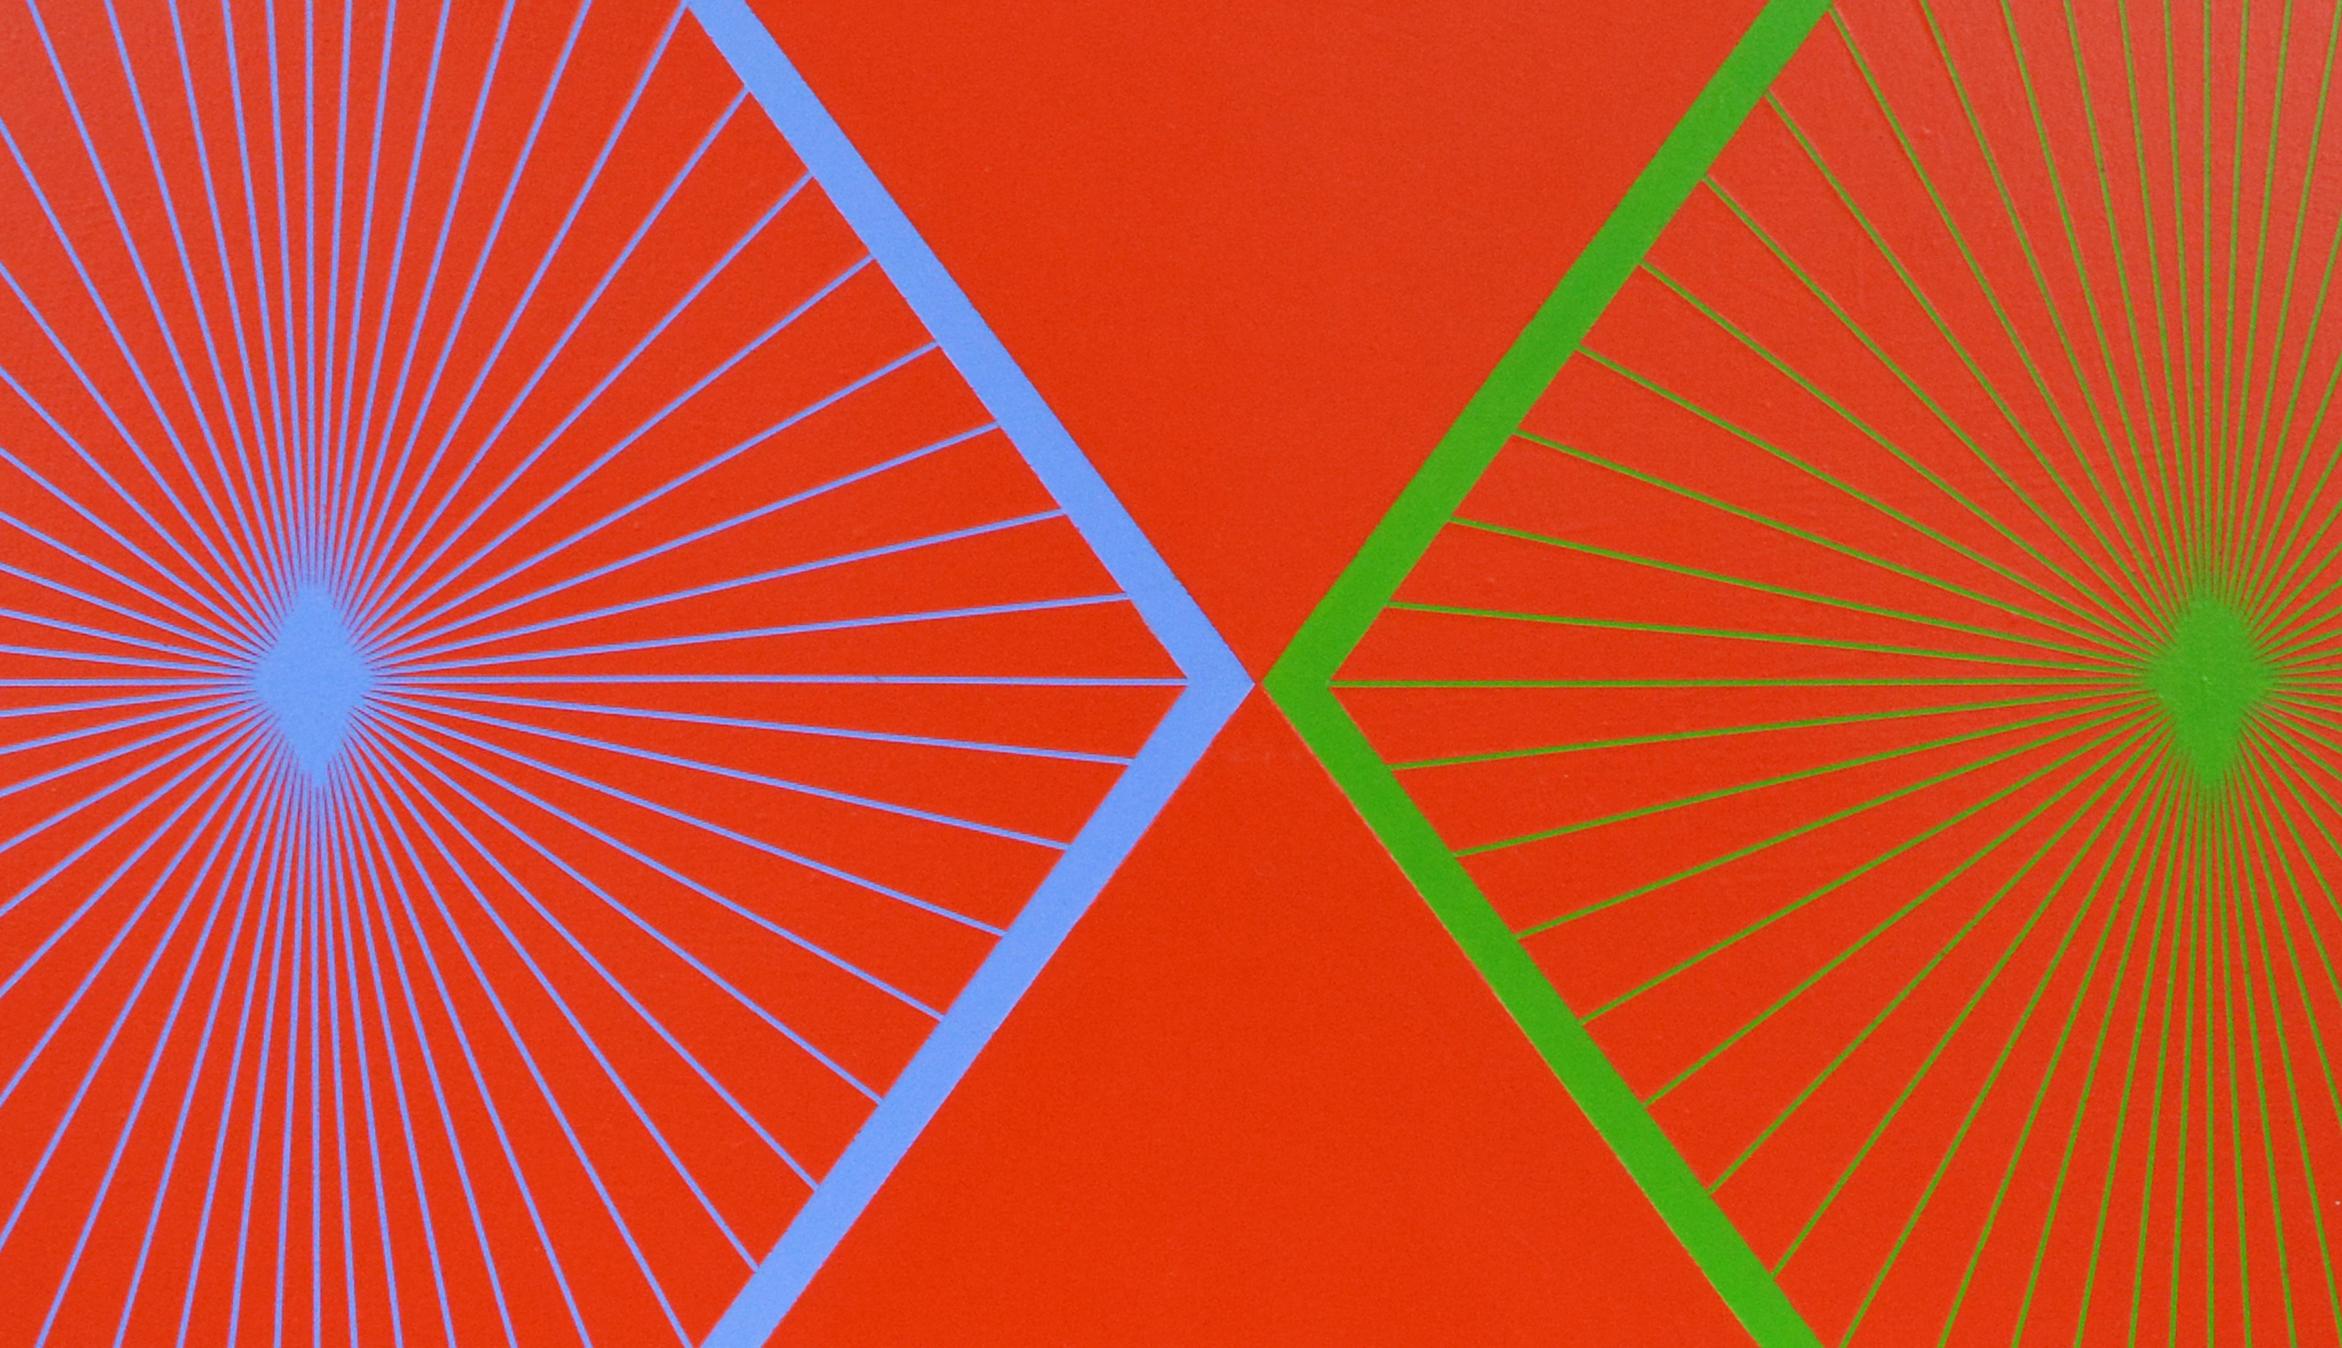 Of the Same Brilliance - Abstract Geometric Painting by Richard Anuszkiewicz